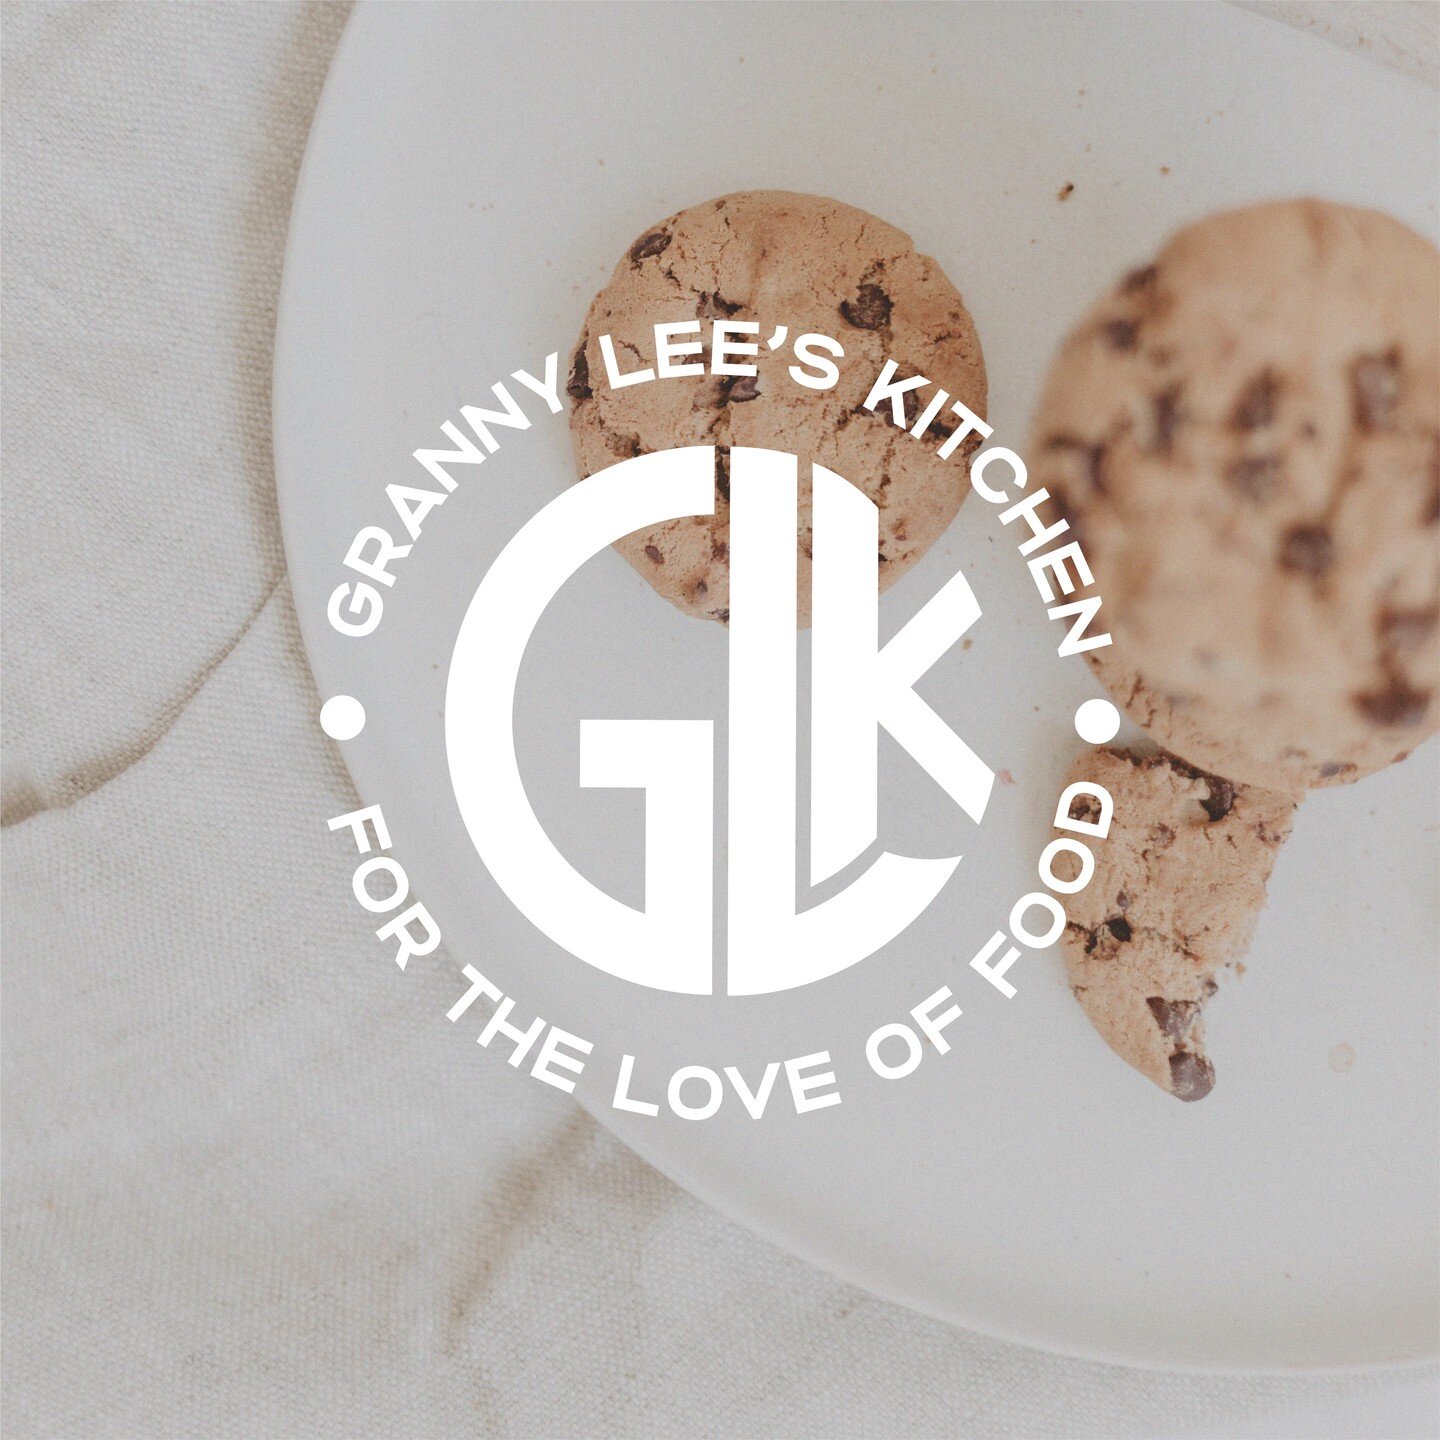 Hi, another brand reveal! 
Granny Lee's Kitchen is a sweet home bakery where experimentation and love go into every product made.

We wanted to create a brand identity that reflects the comfort and joy one would have in their grandma's kitchen as chi